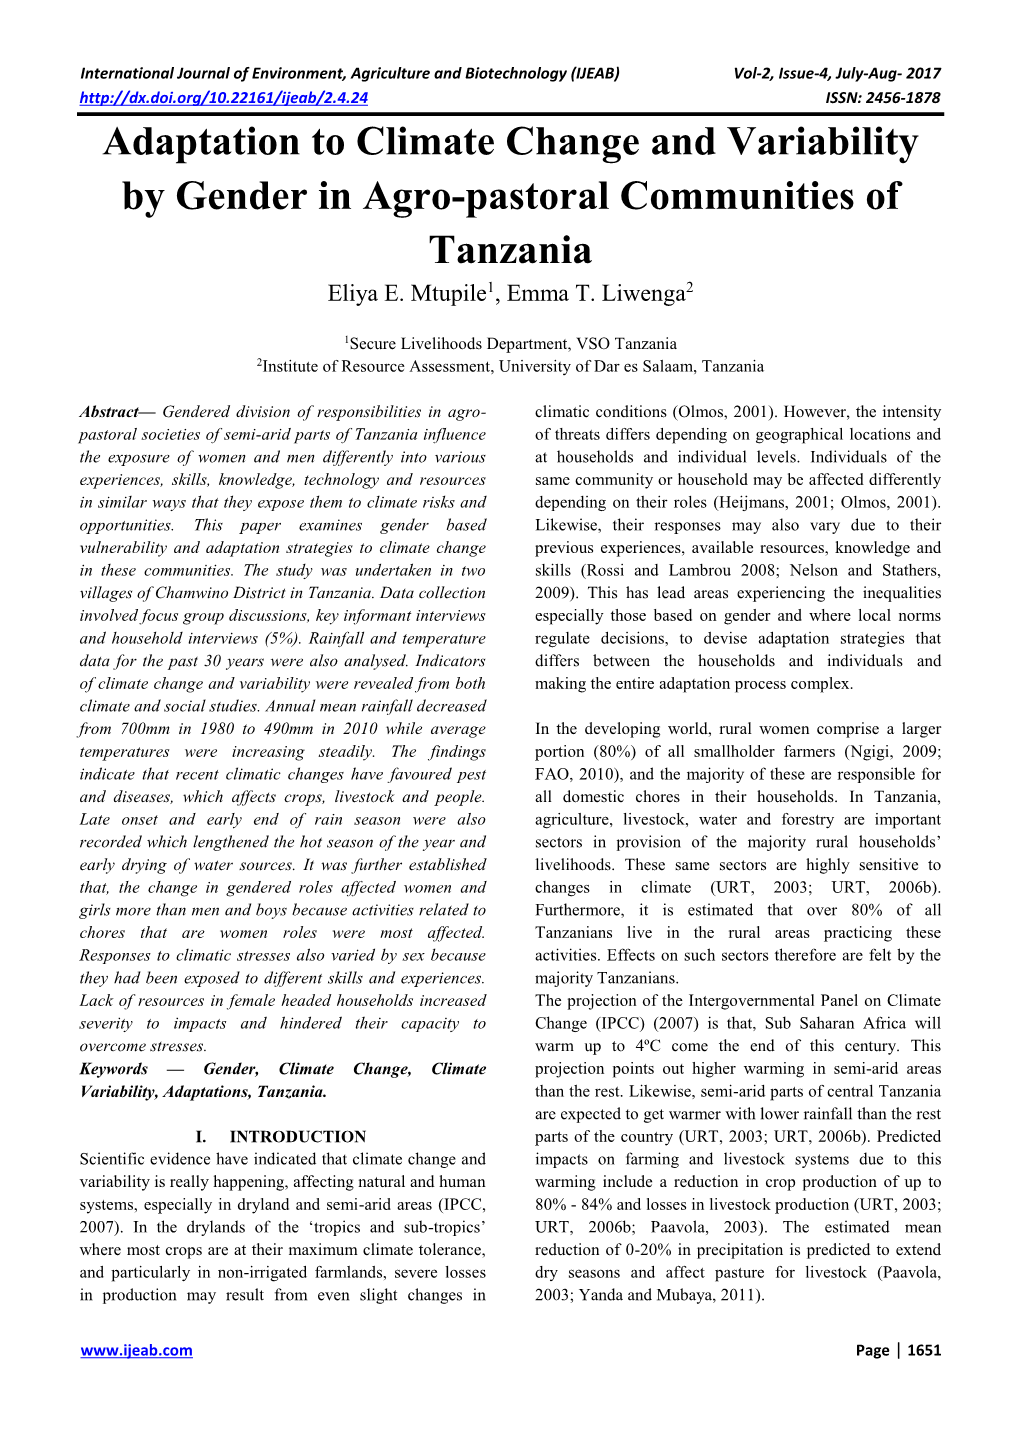 Adaptation to Climate Change and Variability by Gender in Agro-Pastoral Communities of Tanzania Eliya E